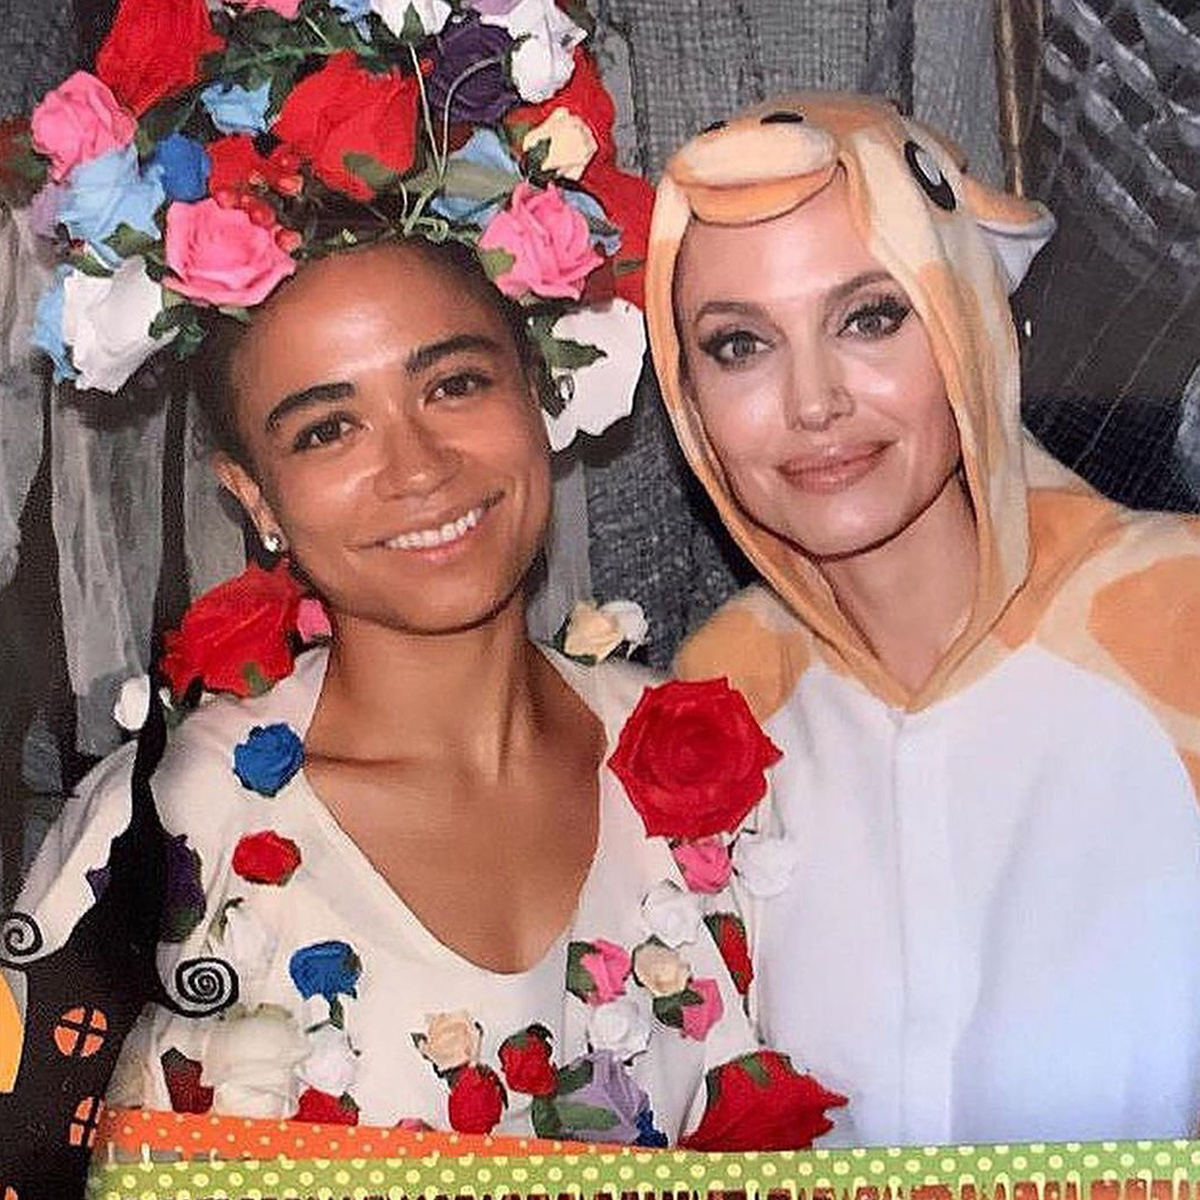 Angelina Jolie Dresses as Adorable Giraffe for Halloween Party With Eternals Cast - E! NEWS